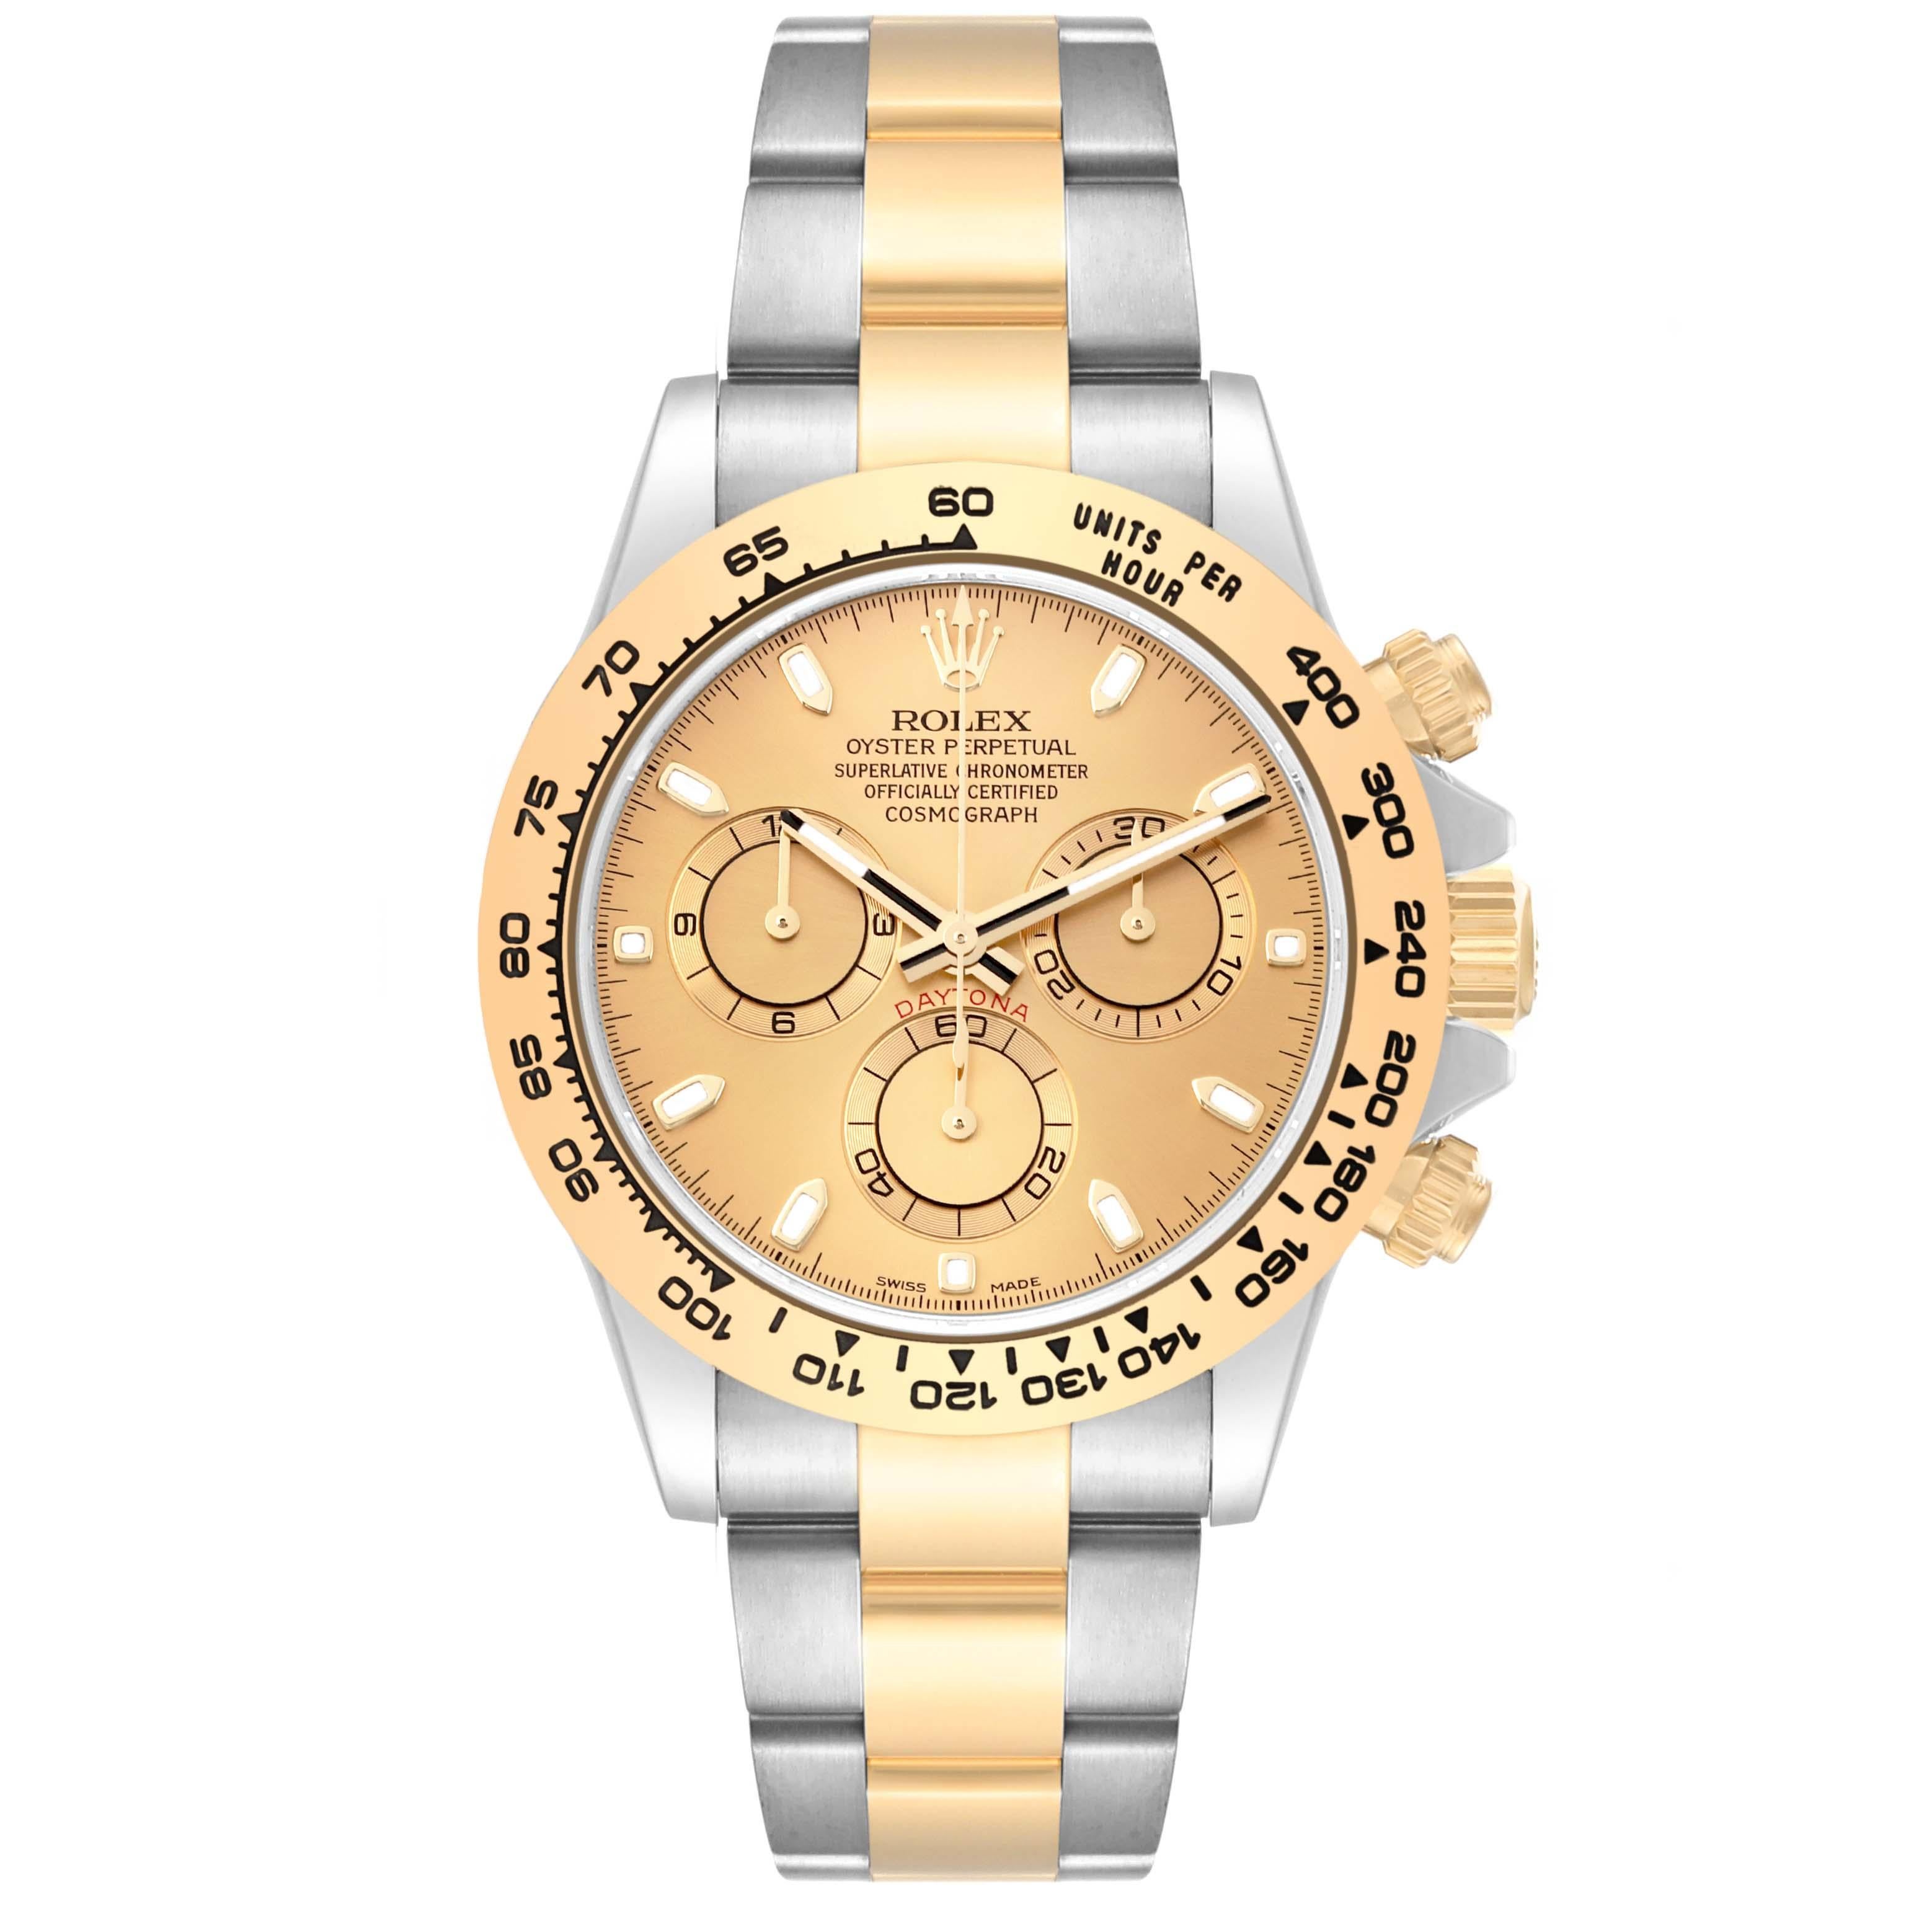 Rolex Cosmograph Daytona Champagne Dial Steel Yellow Gold Mens Watch 116503 For Sale 1